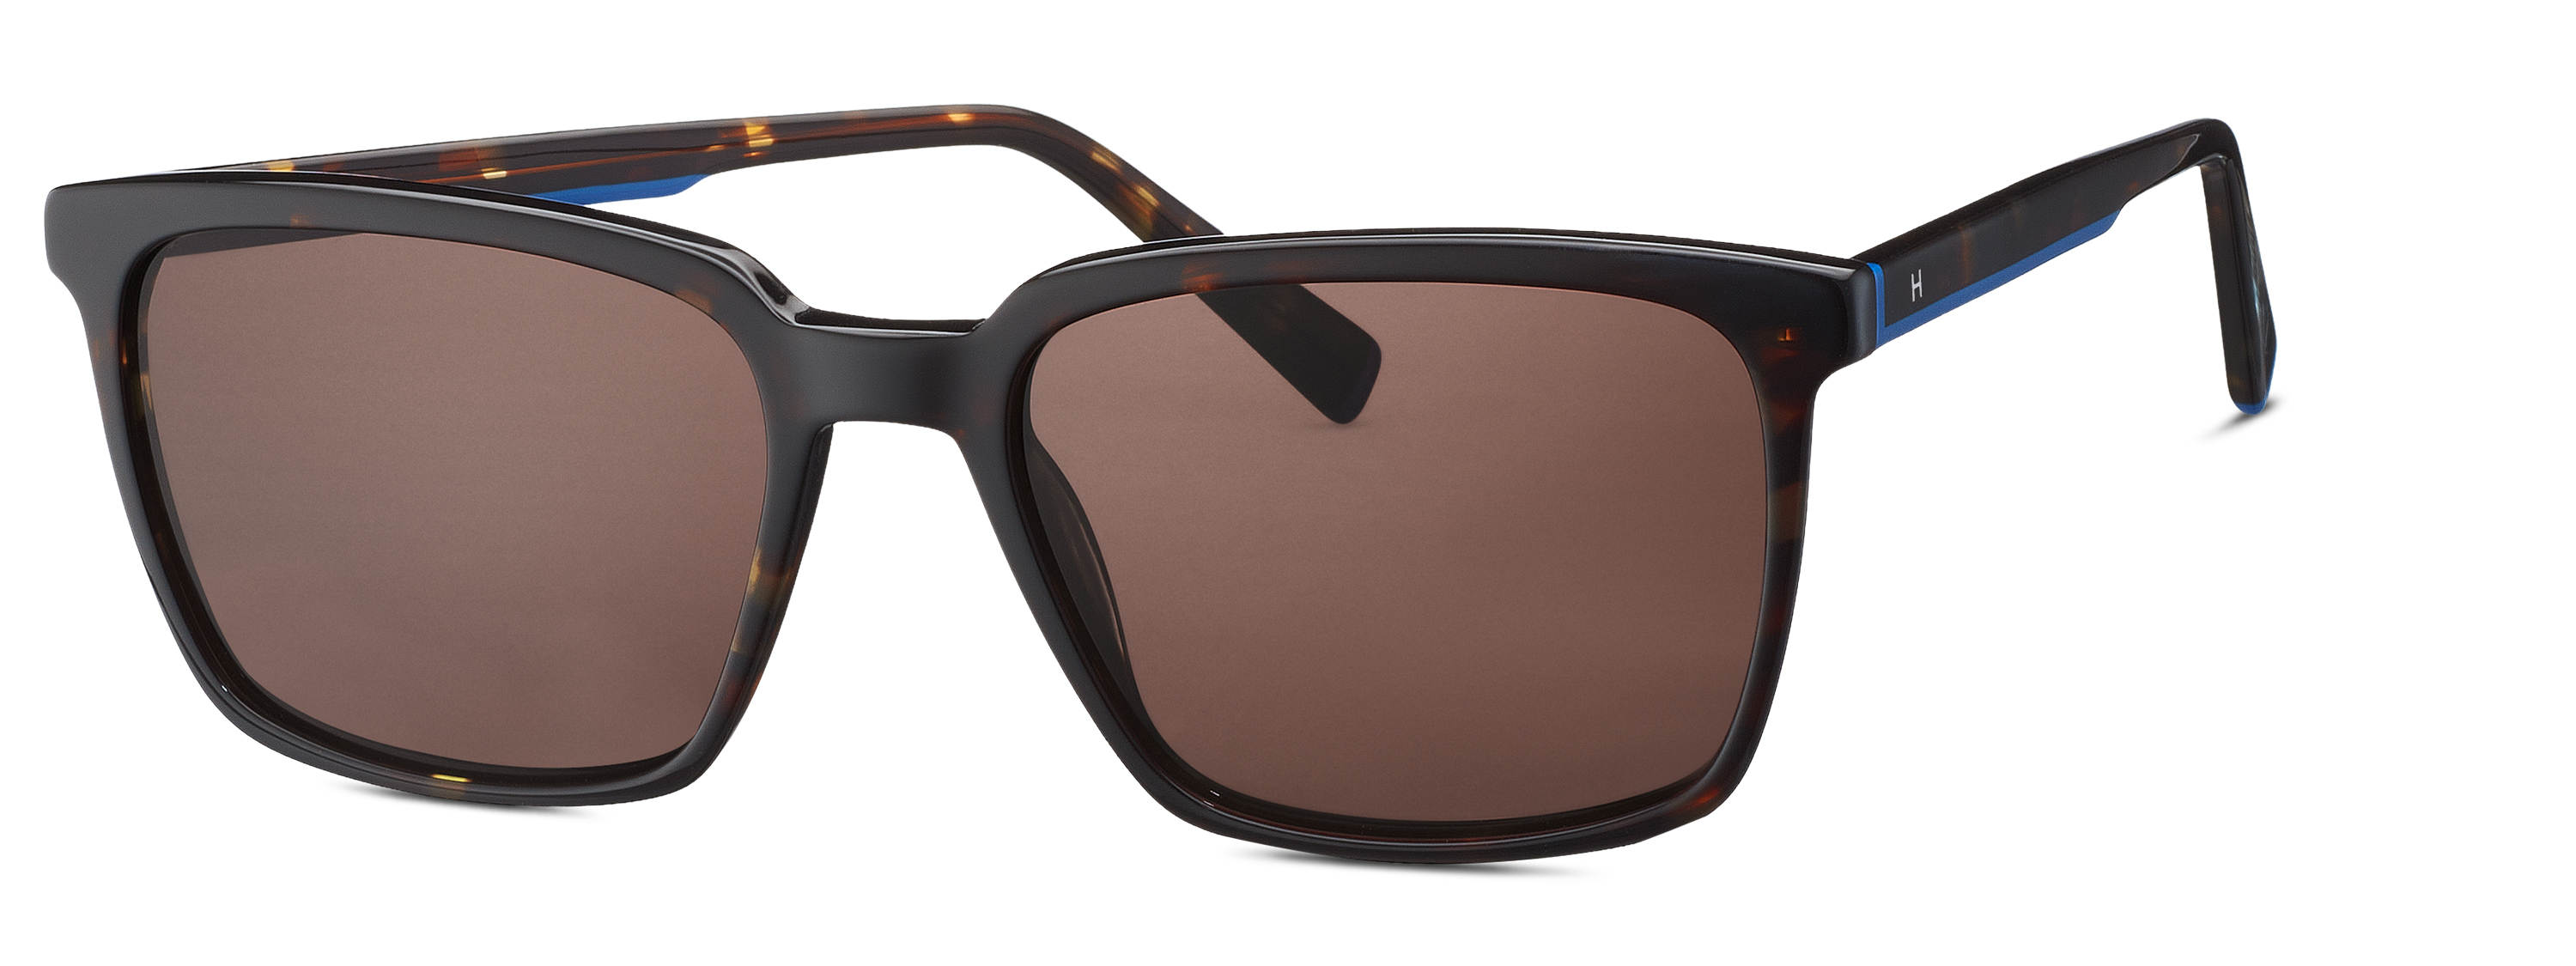 [products.image.front] HUMPHREY´S eyewear 588181 60 Sonnenbrille